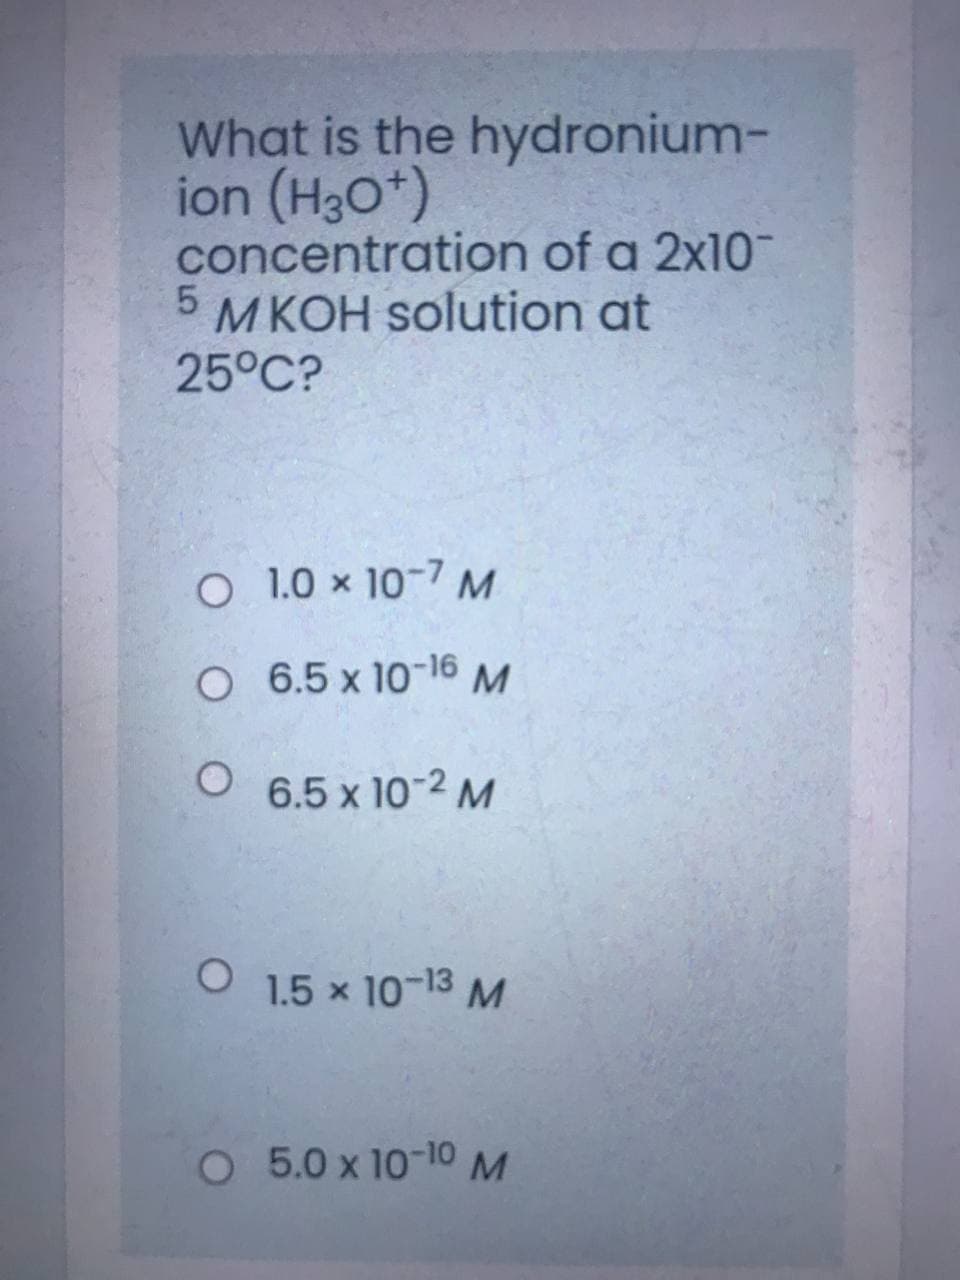 What is the hydronium-
ion (H3O*)
concentration of a 2x10
MKOH solution at
25°C?
O 1.0 x 10-7 M
O 6.5 x 10-16 M
6.5 x 10-2 M
1.5 x 10-13 M
O 5.0 x 10-10M
